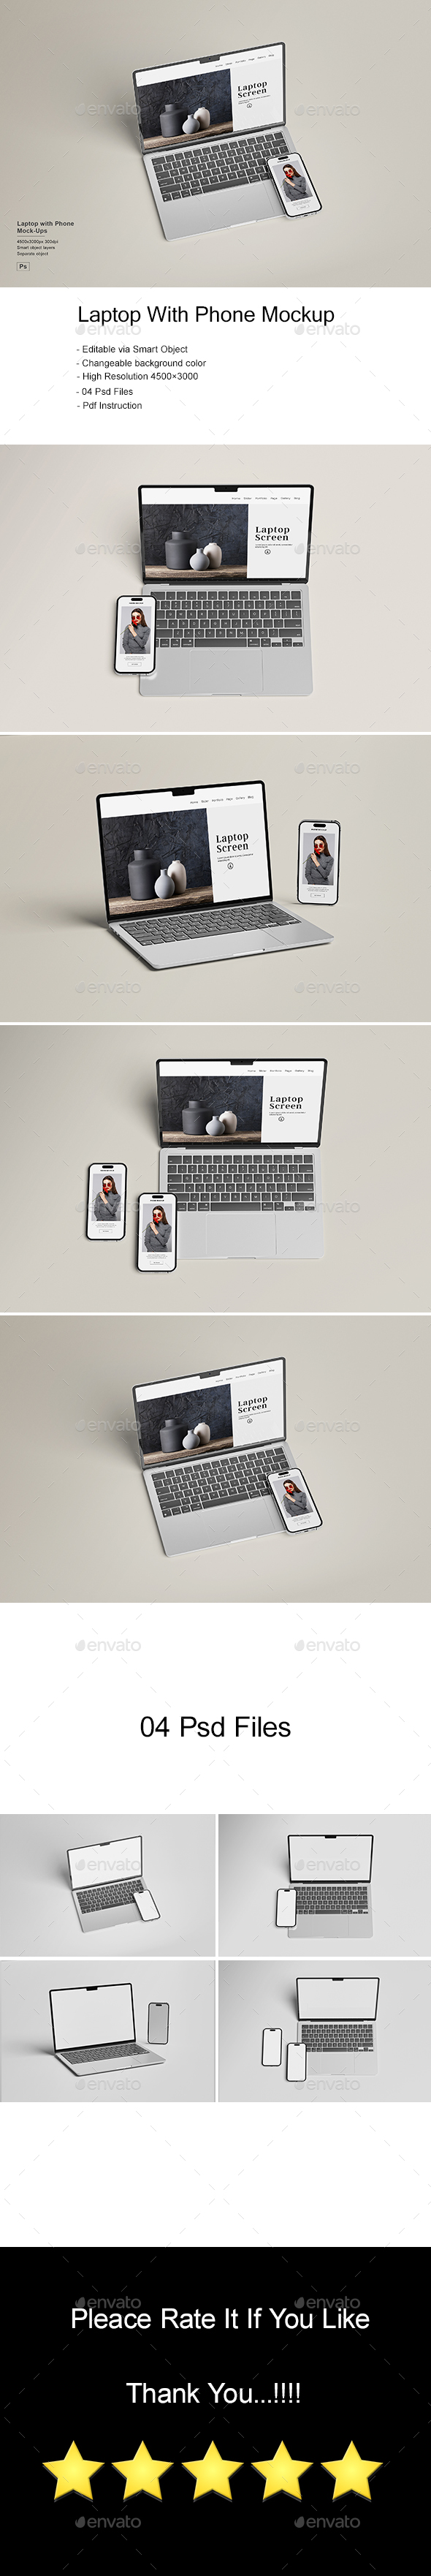 Laptop with Phone Mock-Ups